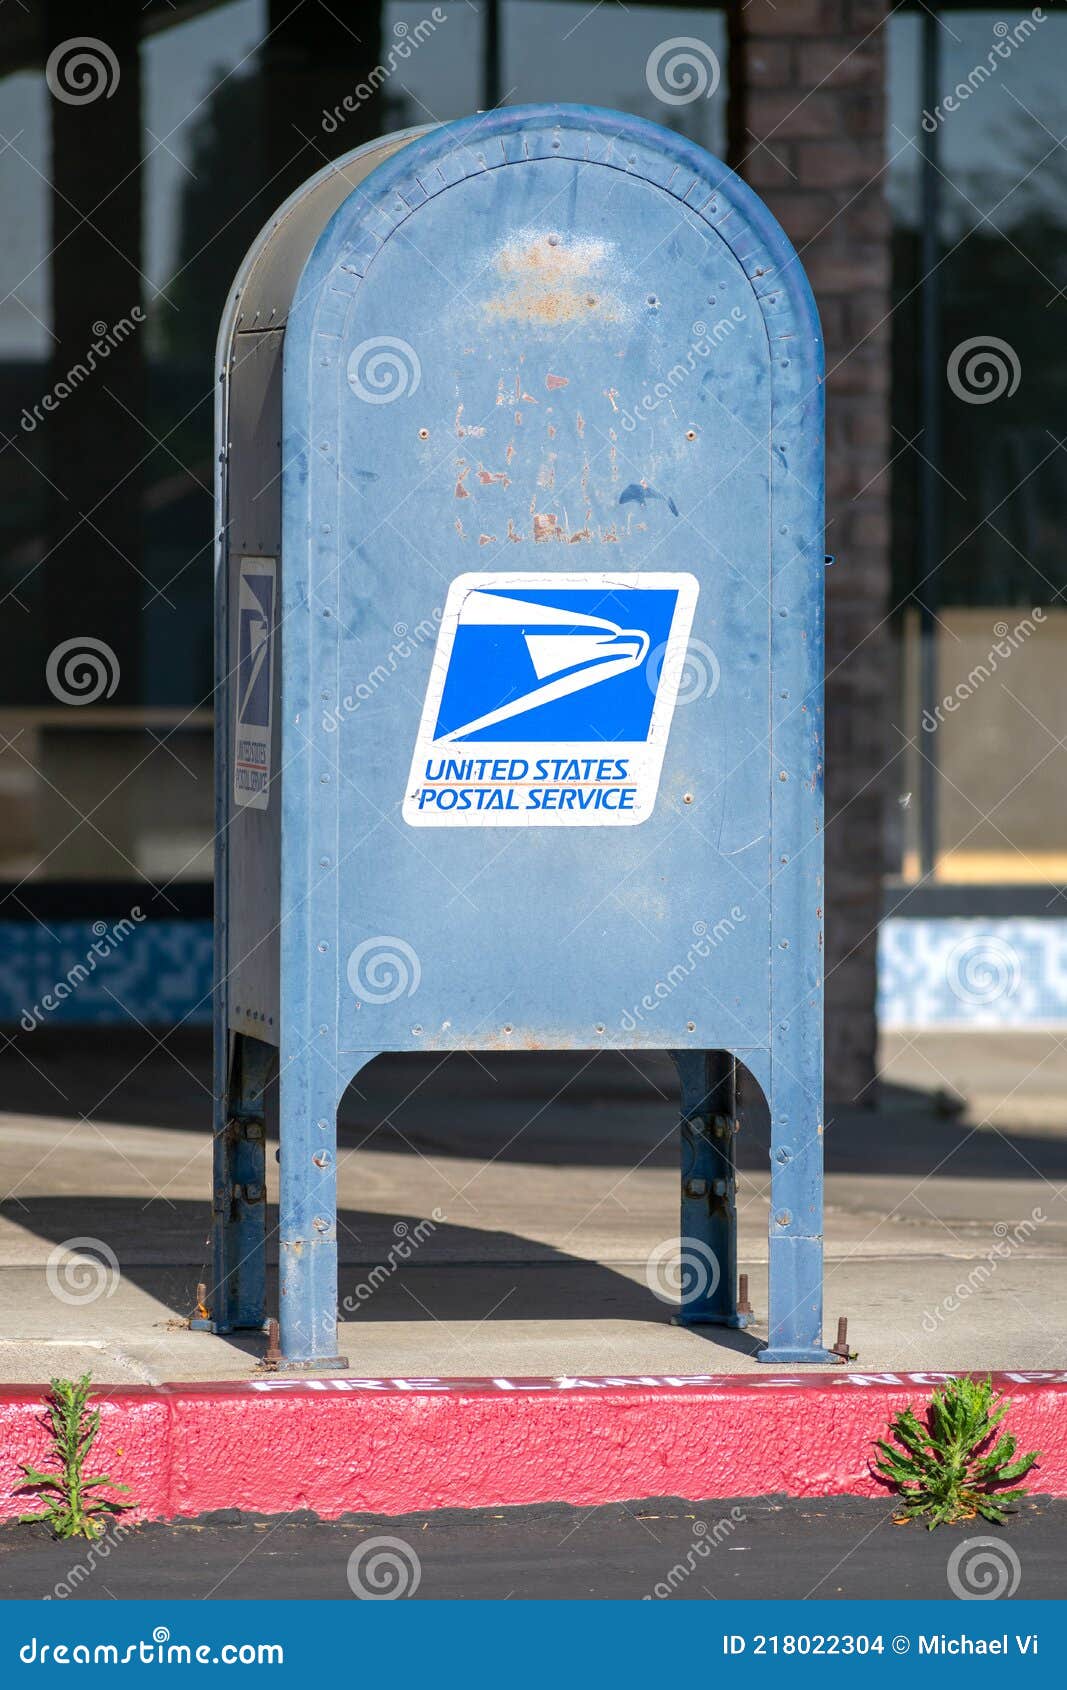 Usps Blue Outdoor Mailbox Weathered Mail Collection Box Of United States Postal Service Standing Next To The Red Fire Lane San Editorial Stock Image Image Of City Convenience